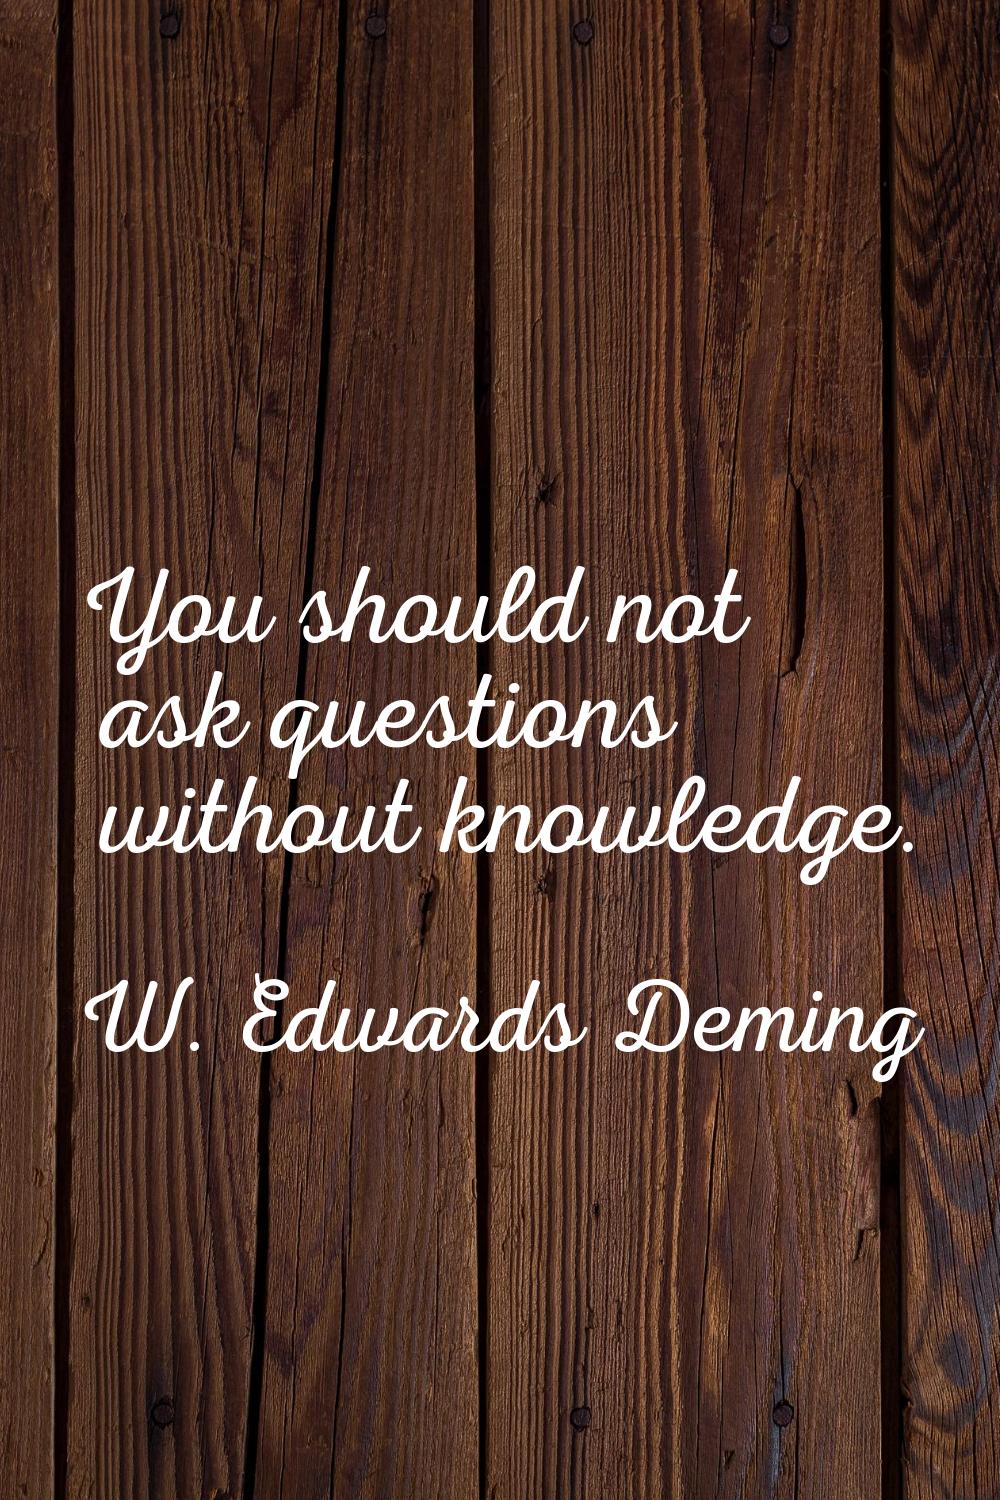 You should not ask questions without knowledge.